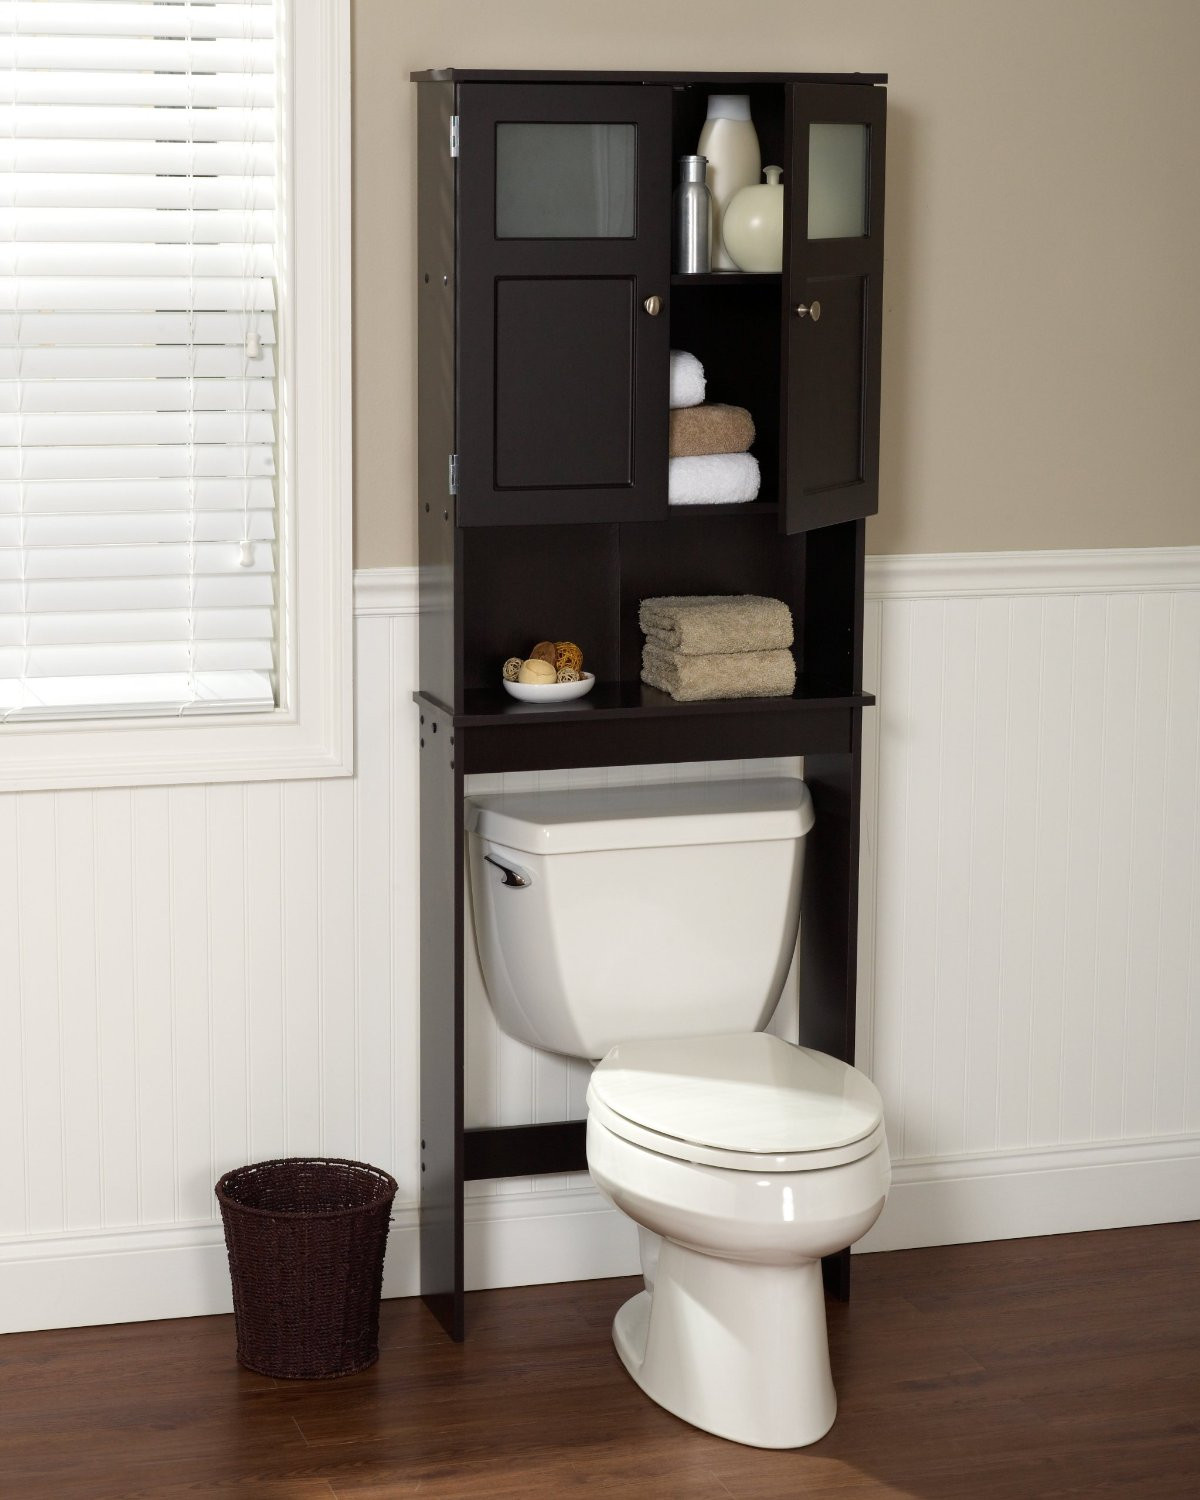 Bathroom Storage Over Toilet
 The Best Over The Toilet Storage Options 2017